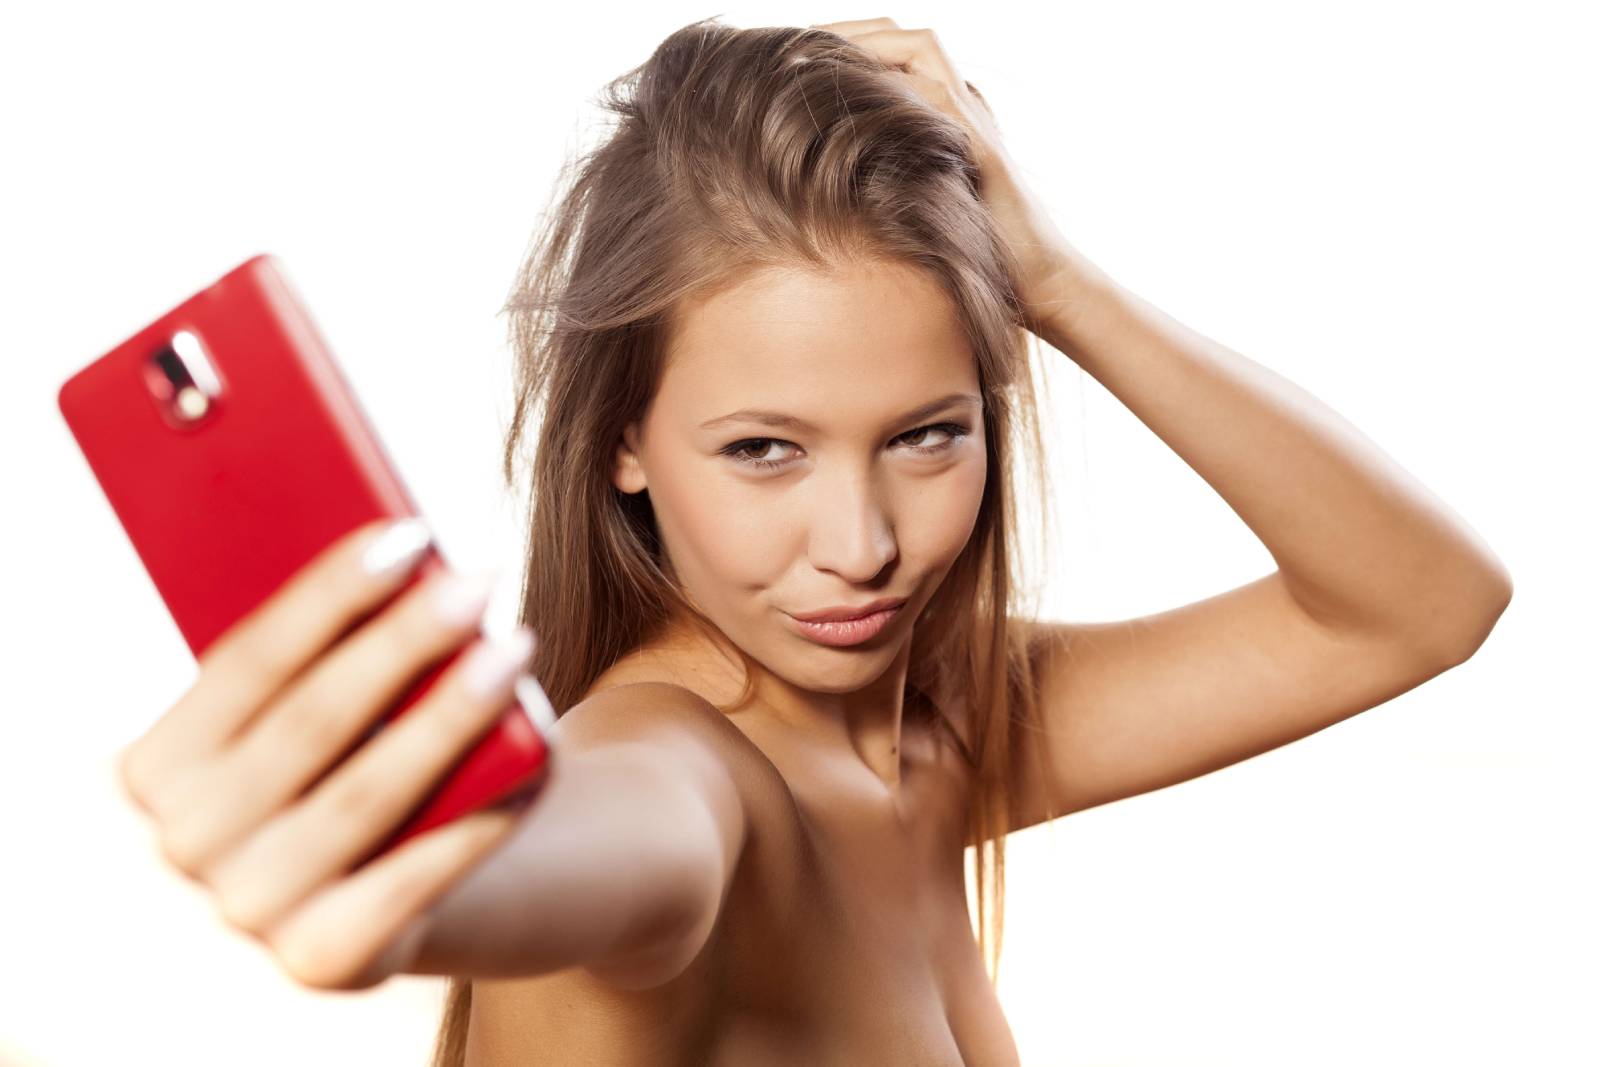 Parenting is not for sissies – When you find your teen sexting